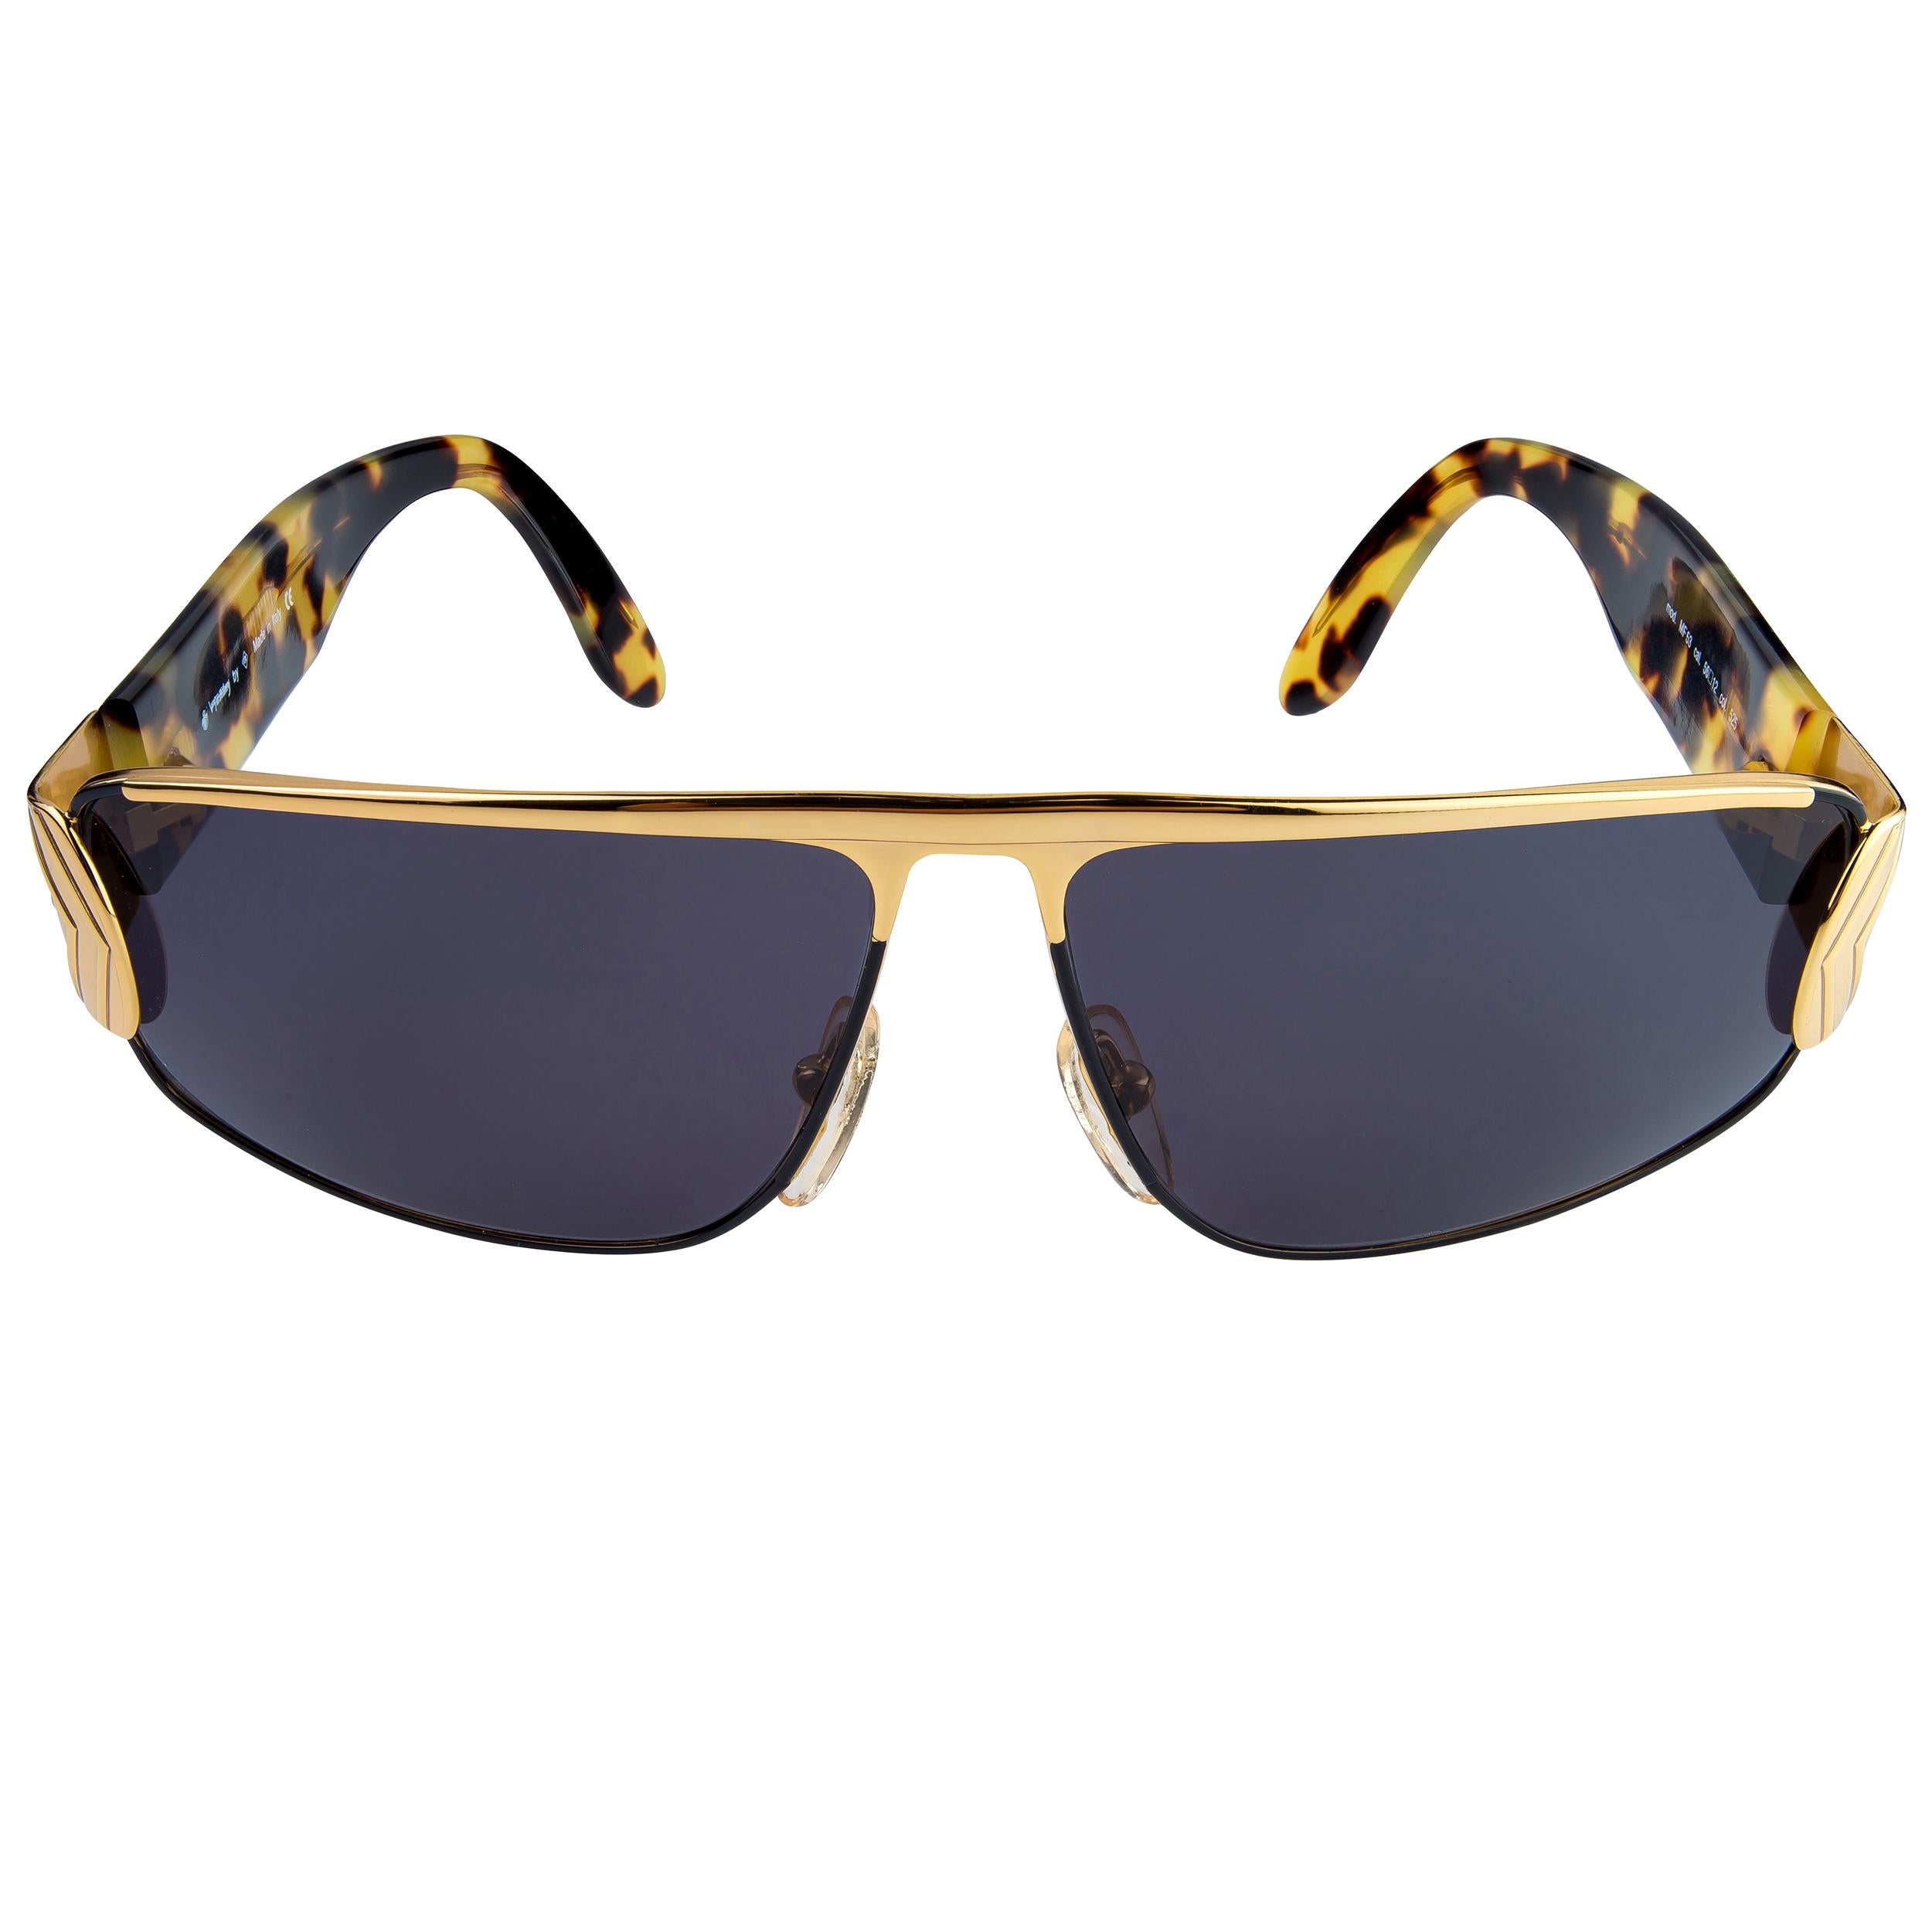 Prince Egon Von Furstenberg sunglasses, made in Italy in the 1980s. 

Before Diane, there was Egon. Egon was a prince from Switzerland and he married Diane and thus made Diane Von Furstenburg a princess. An acclaimed fashion designer, he was a